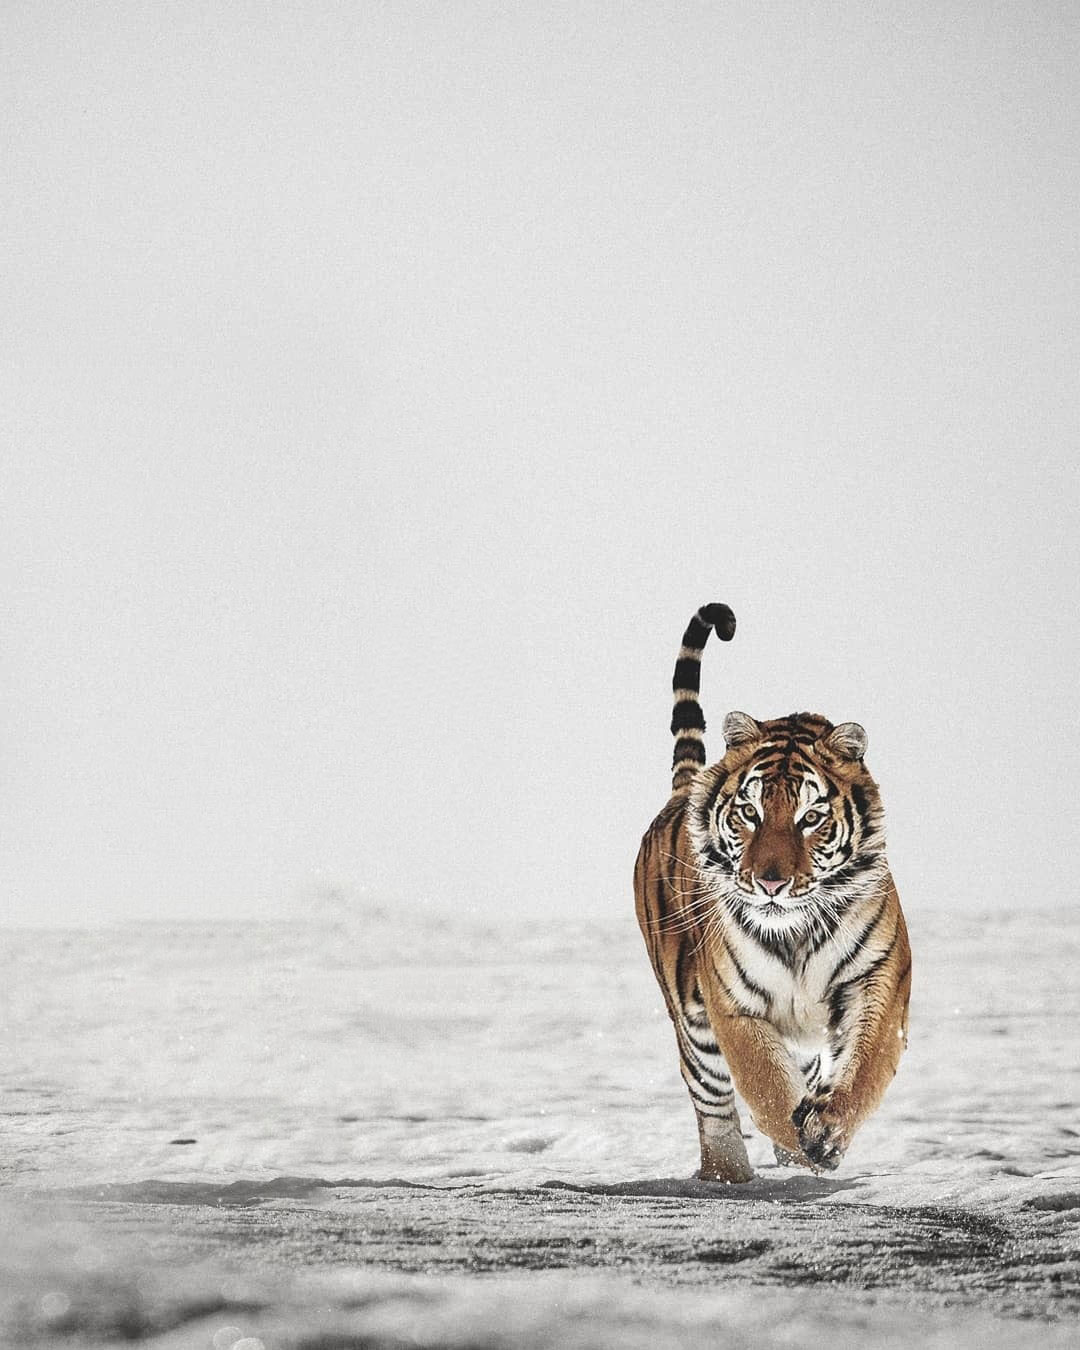 The Tiger HD PicsArt Background Free Stock Image